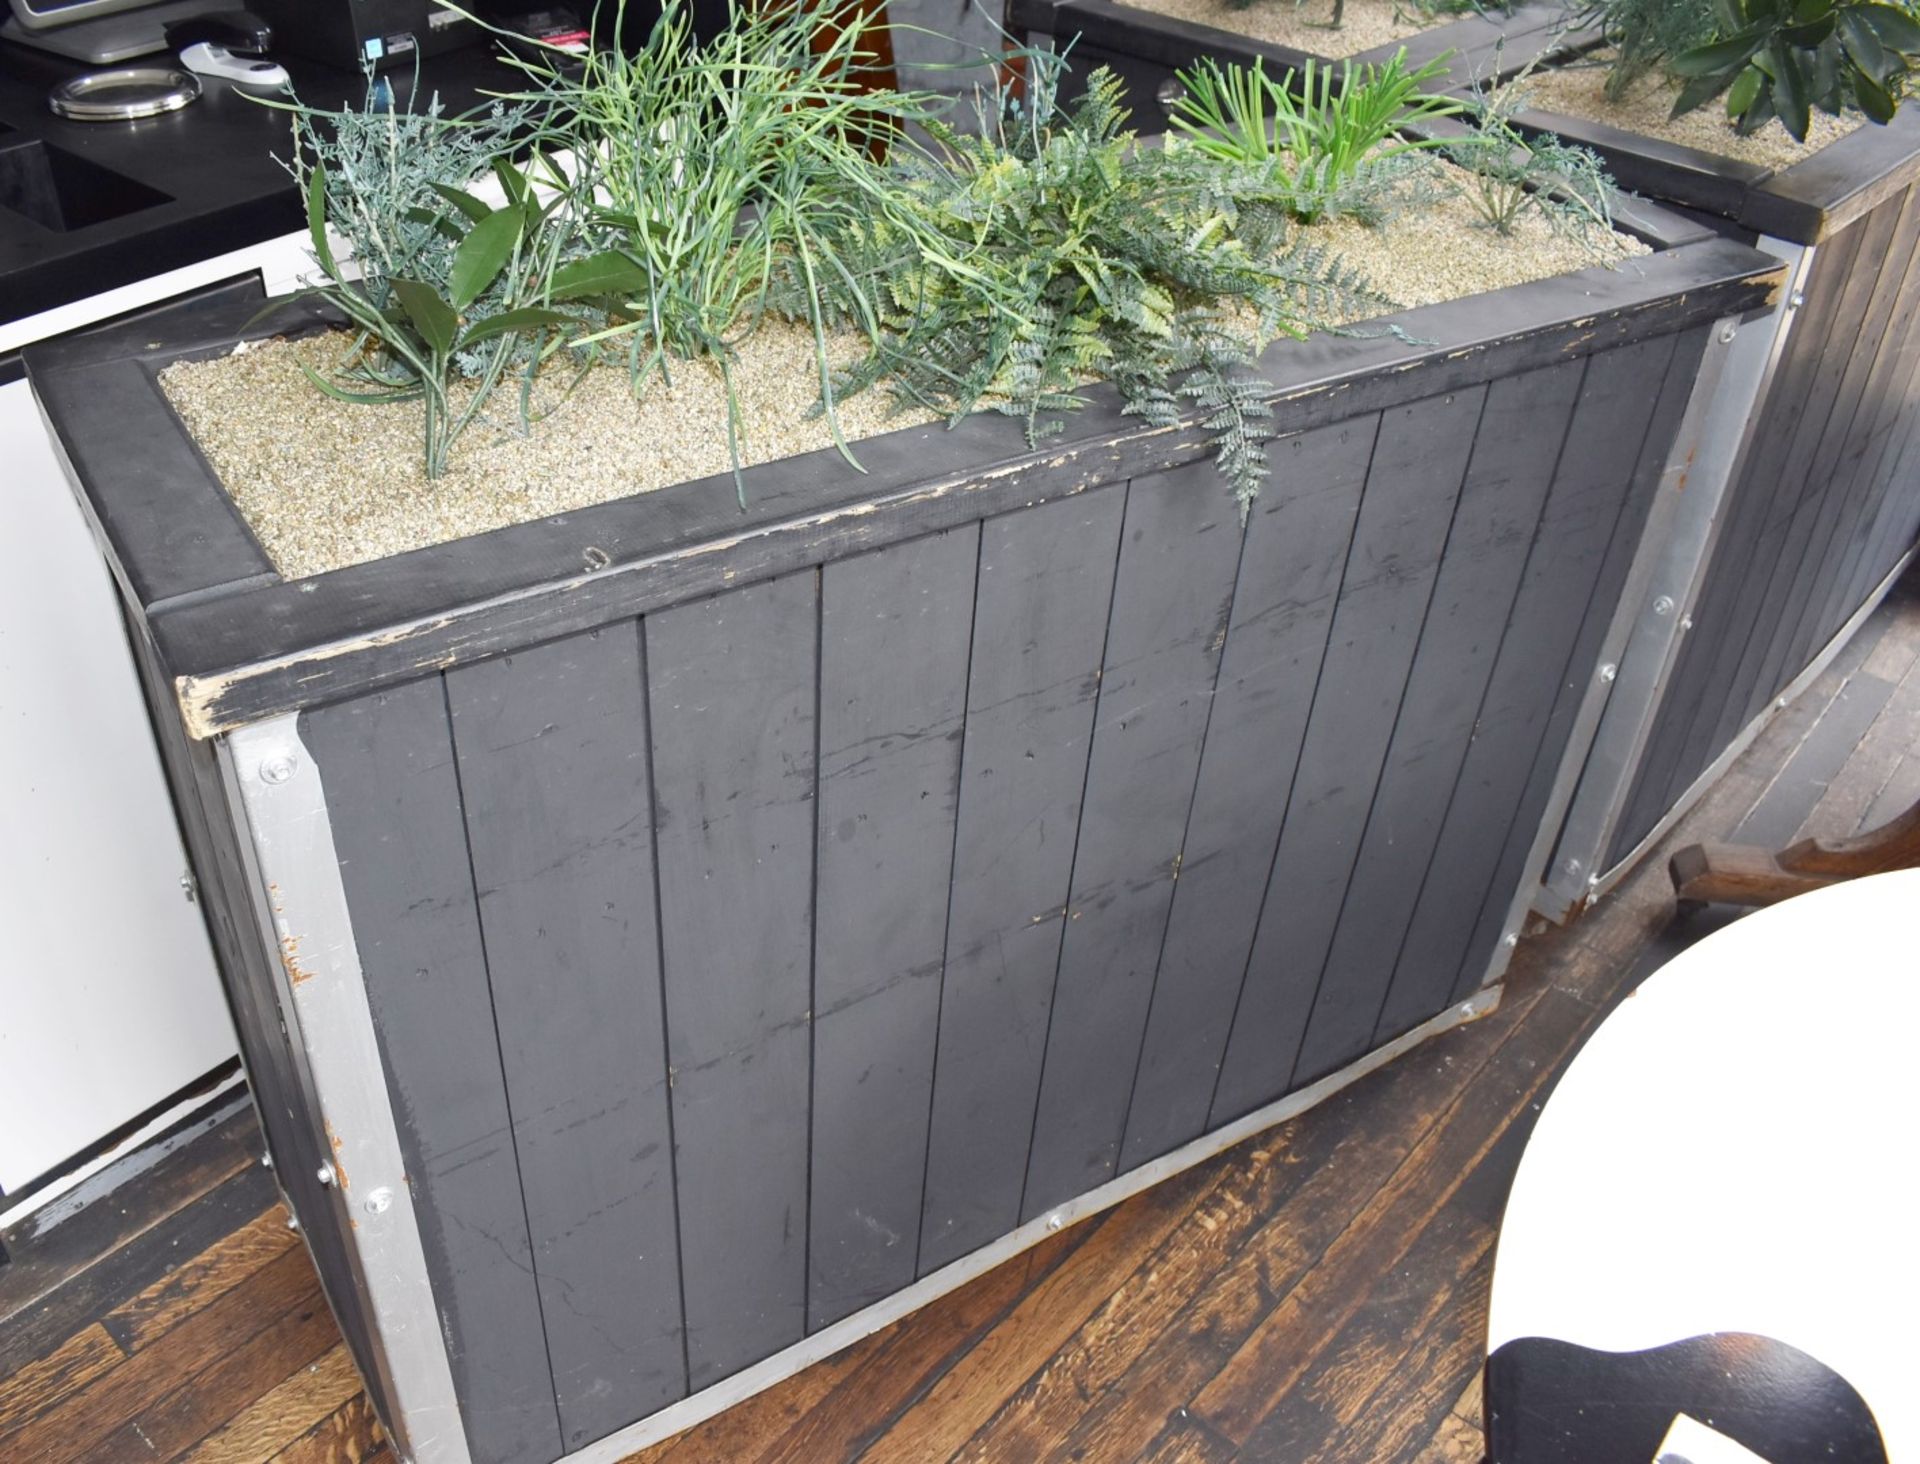 4 x Garden Planters on Wheels With Artificial Plants - Slatted Wooden Design in Grey - Image 7 of 8